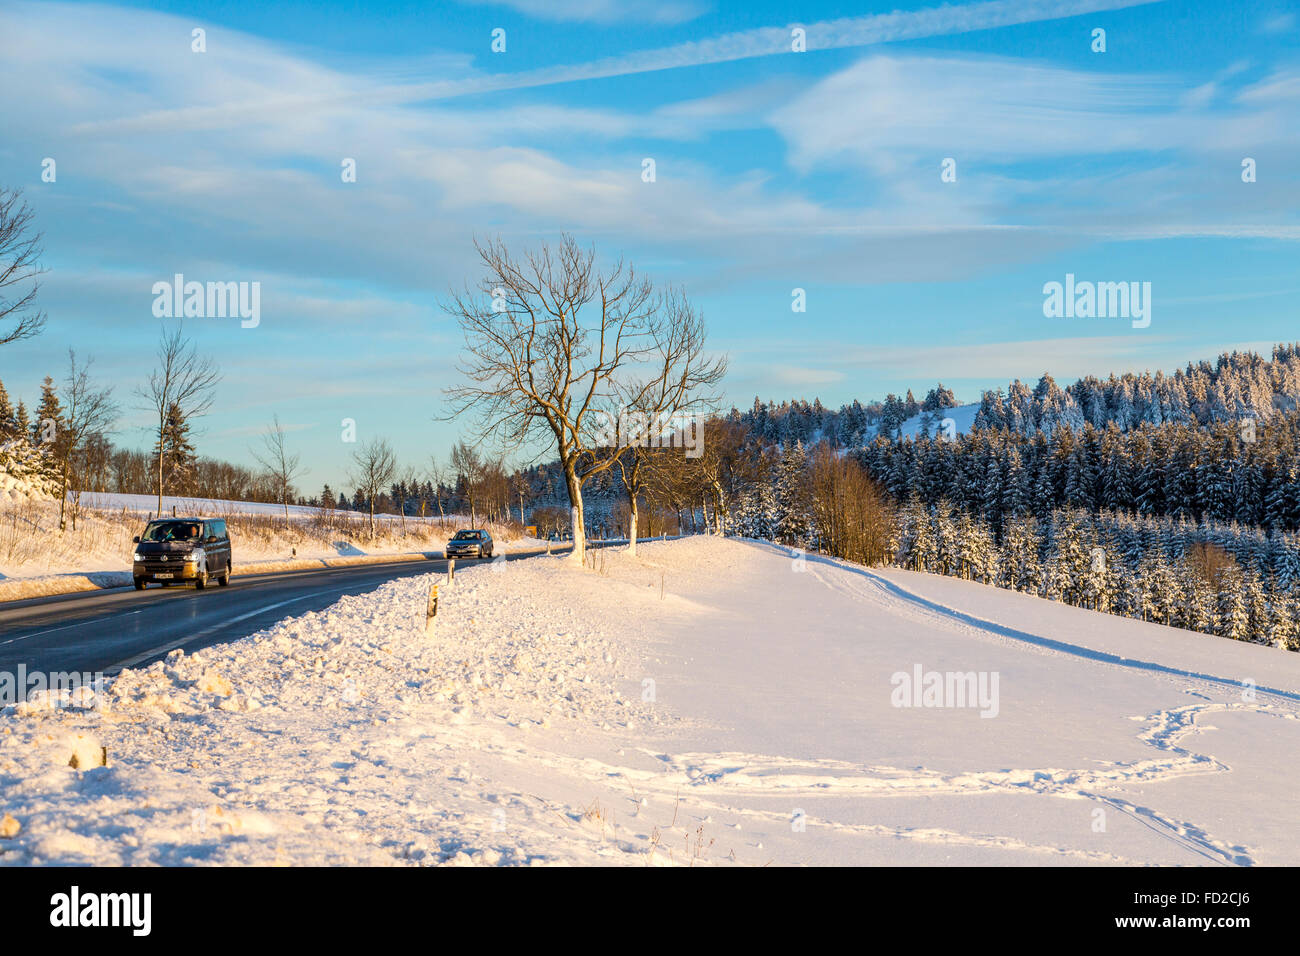 Winter, snowy landscape in the Sauerland area, Germany, country road, Stock Photo